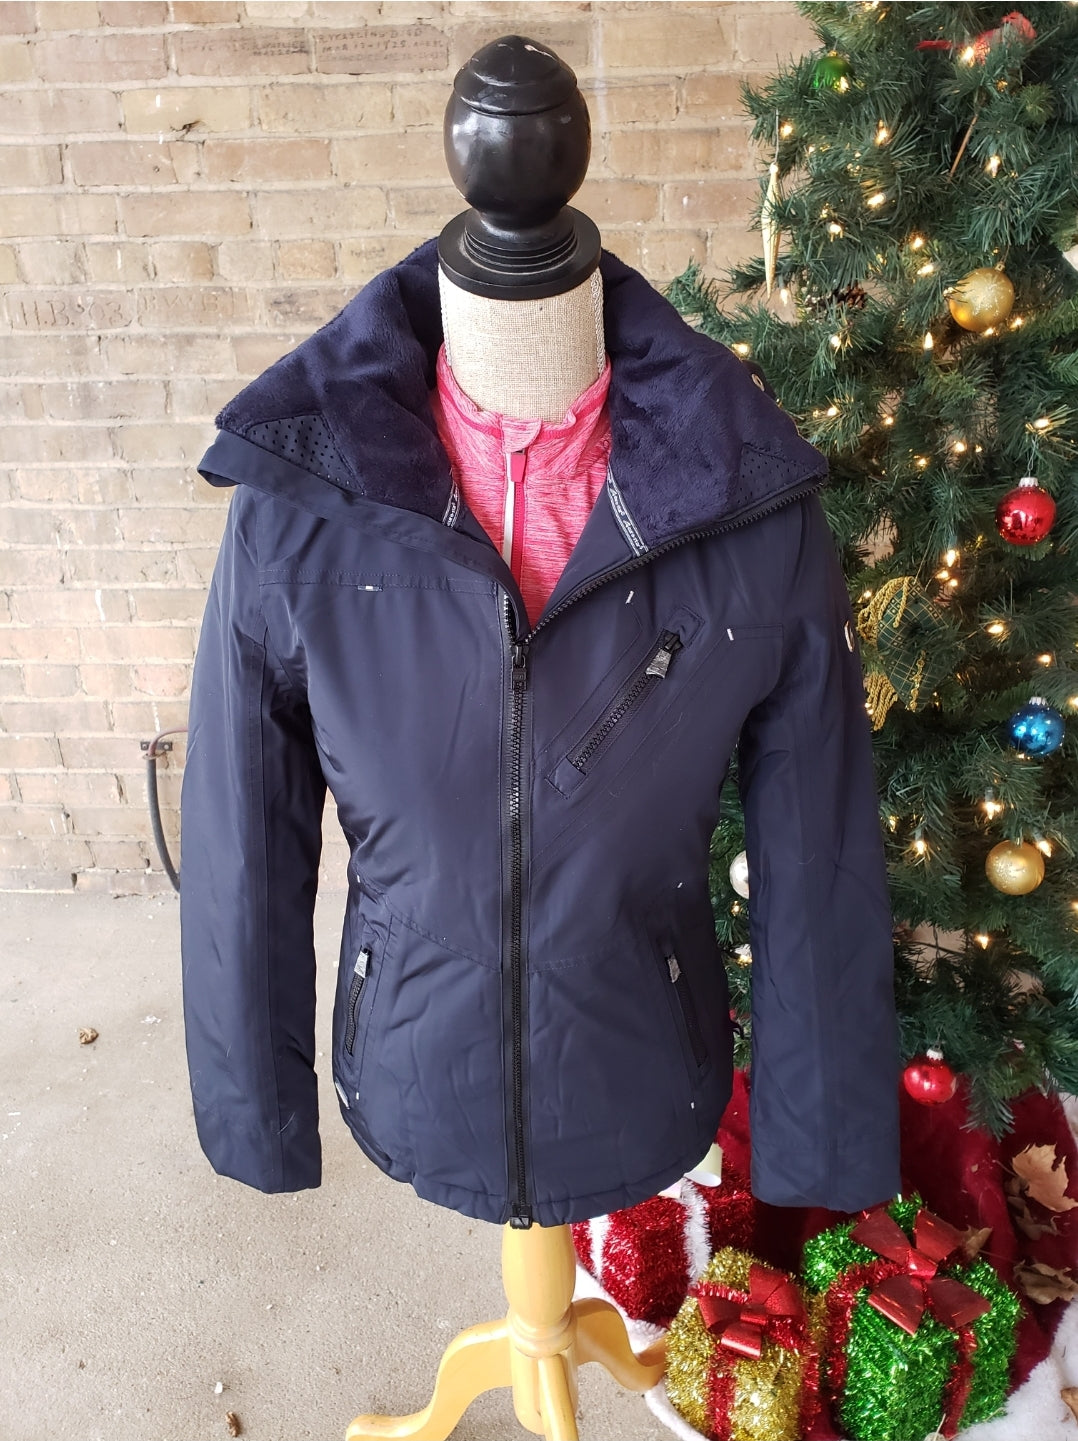 Euro-Star Lois Jacket Jacket Euro Star - Equestrian Fashion Outfitters